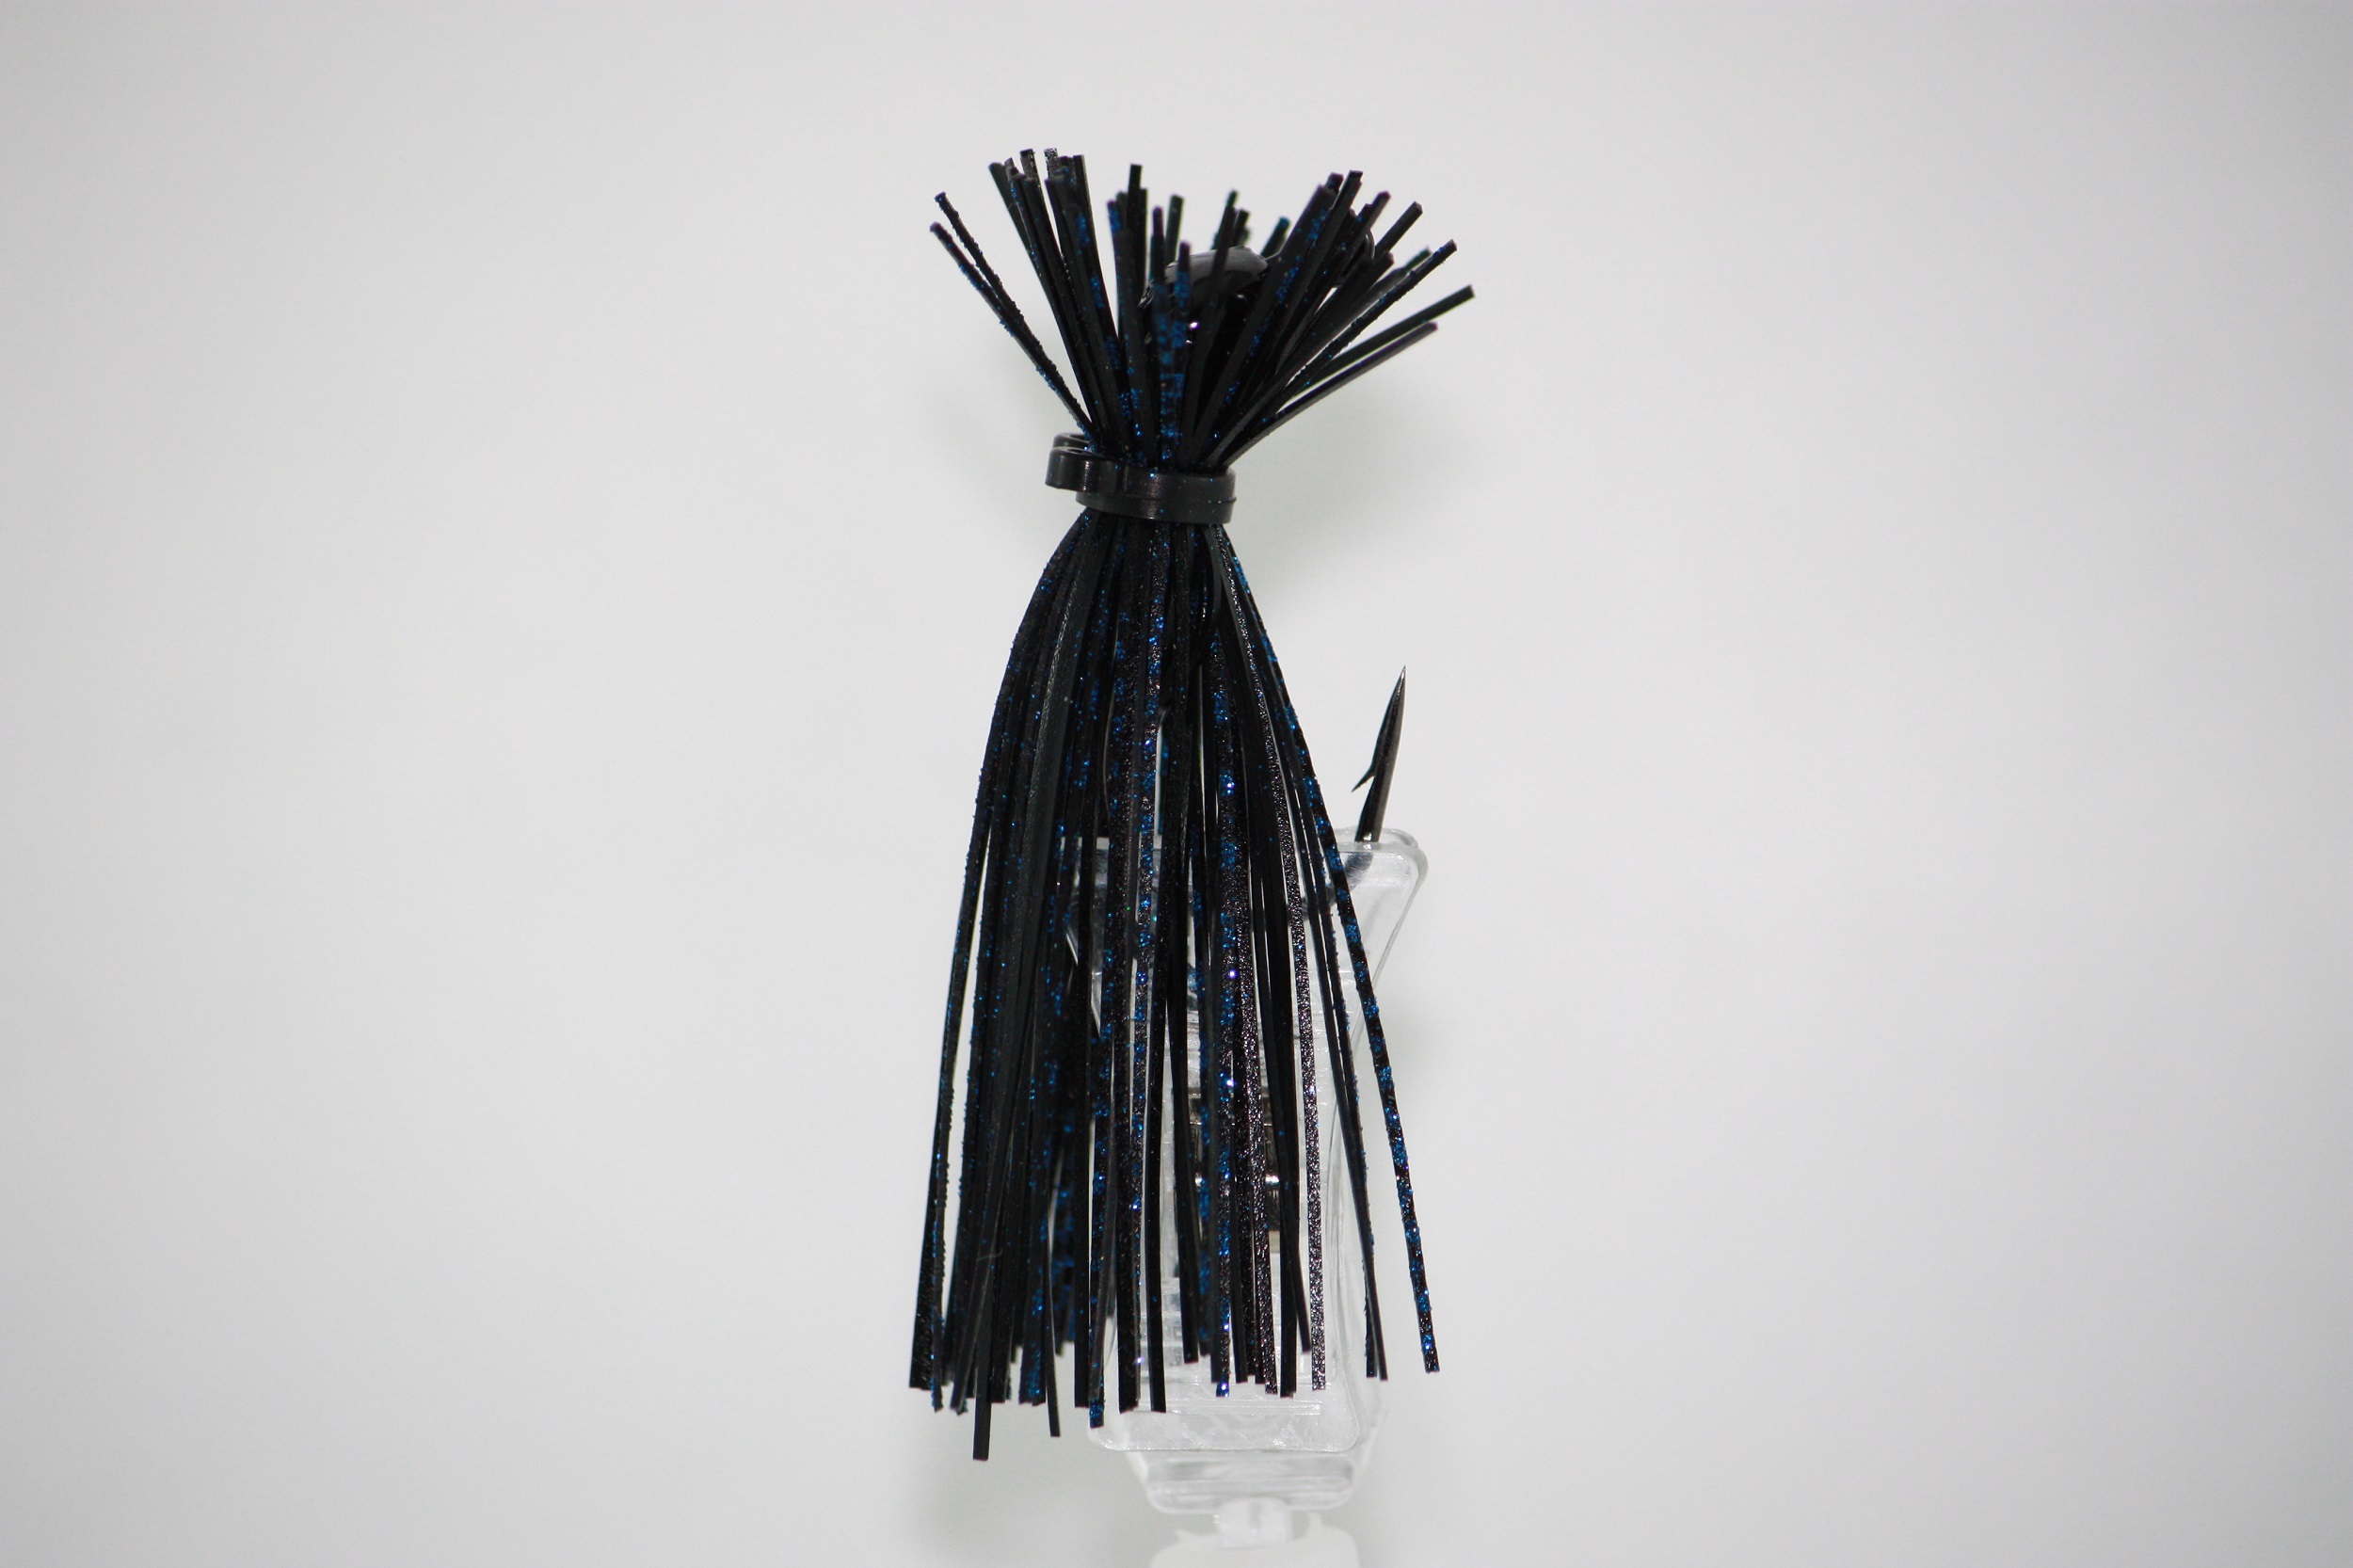 1/4 oz Black/Blue Craw Finesse Jig - The Perfect Jig